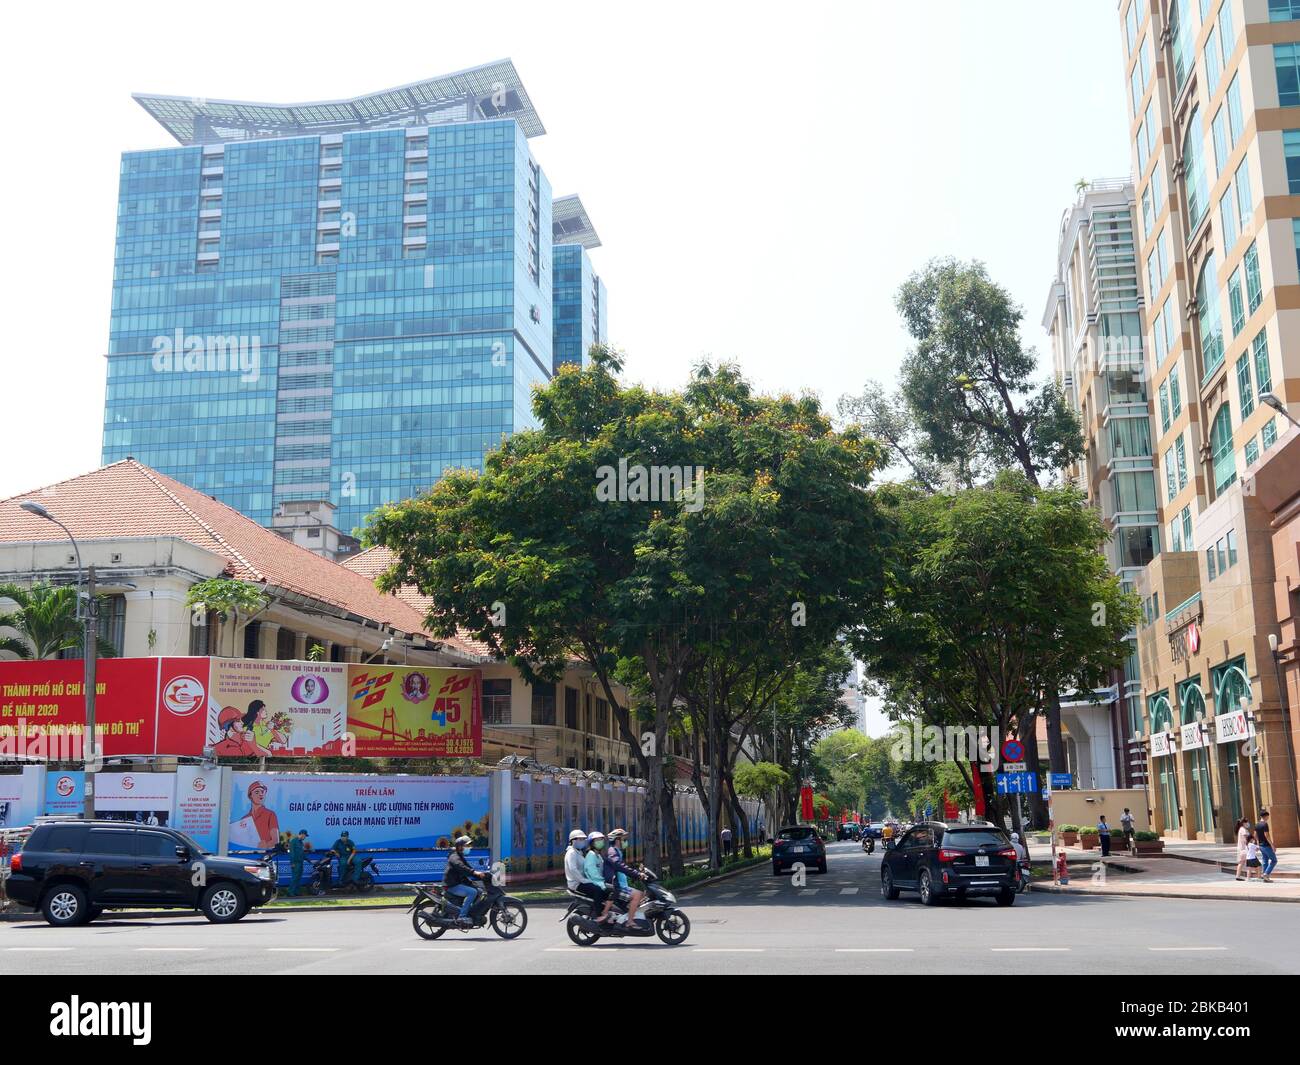 Ho Chi Minh City, Vietnam - April 30, 2020: Dong Khoi, one of the main street in the center of Ho Chi Minh City Stock Photo